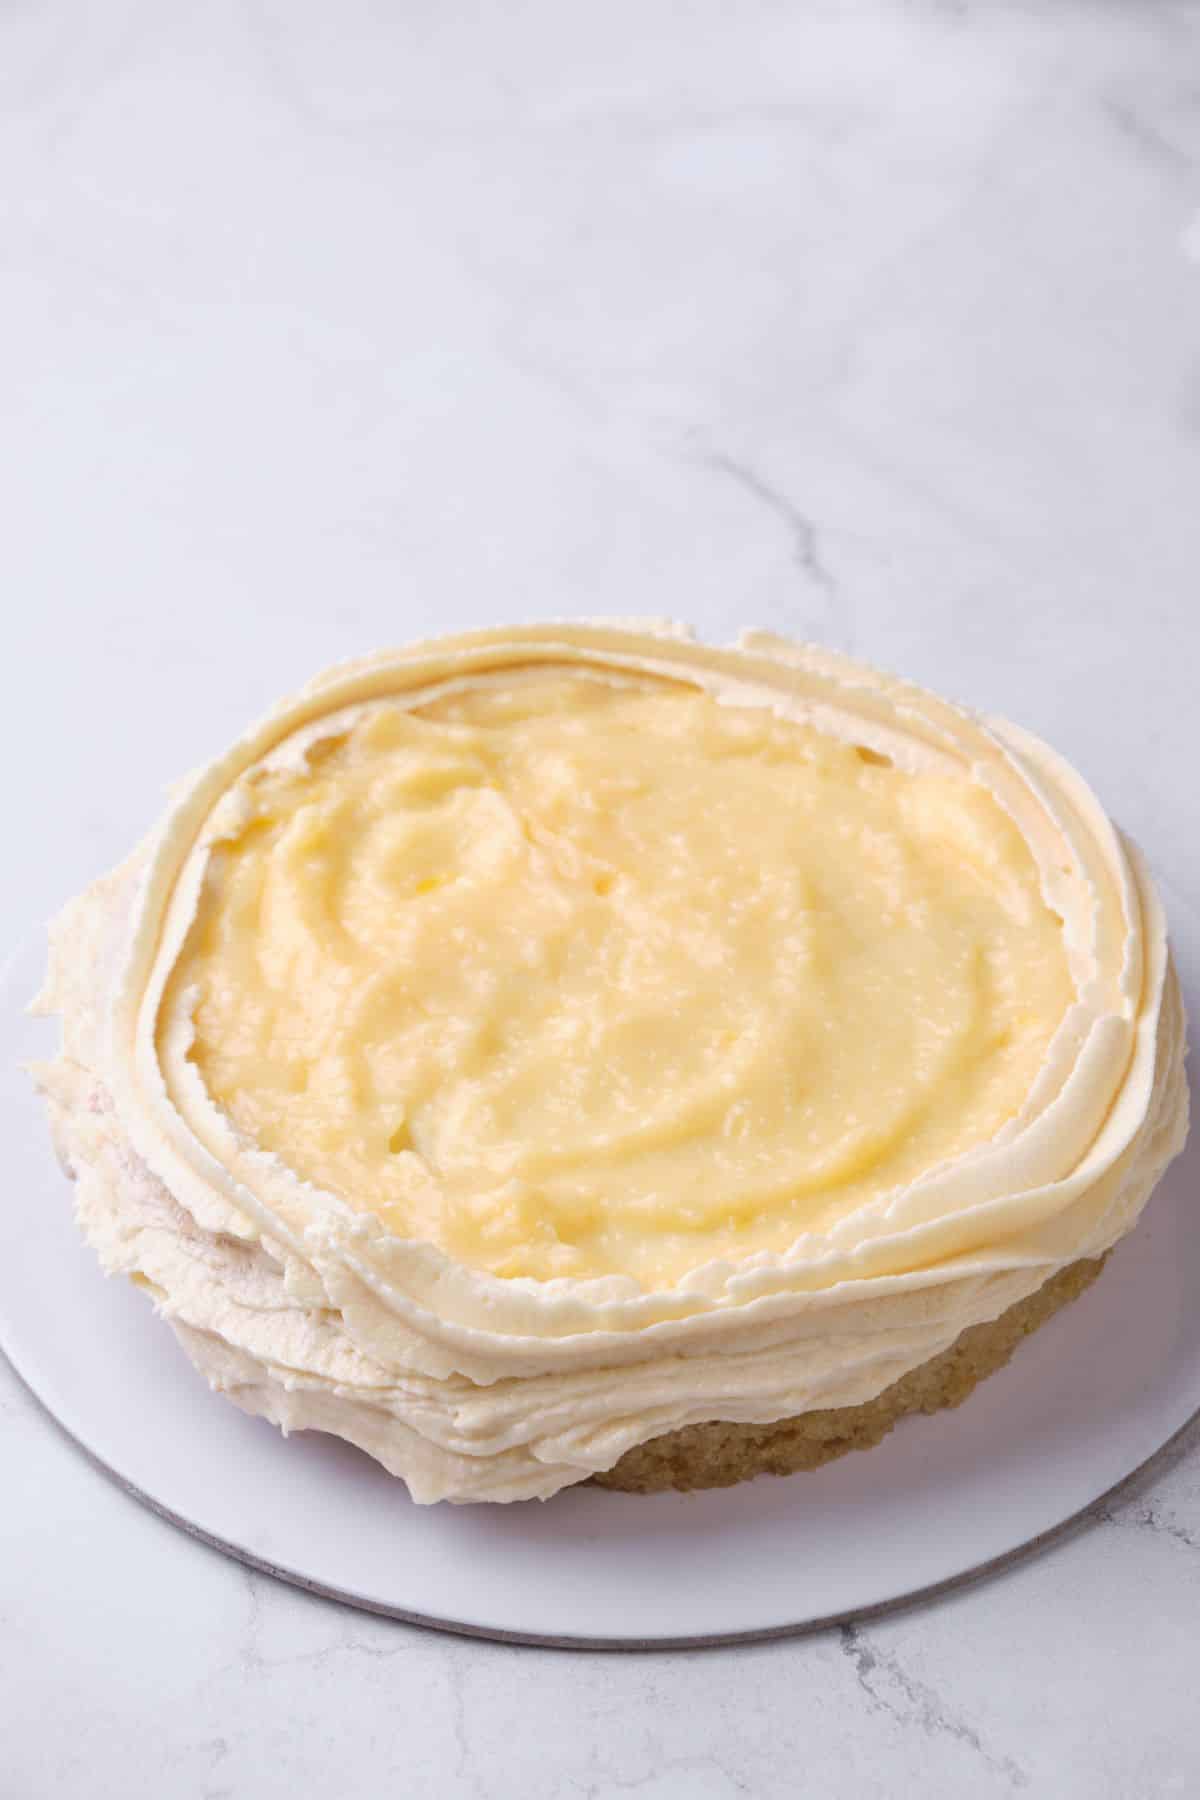 Lemon curd filling on top of a cake layer.